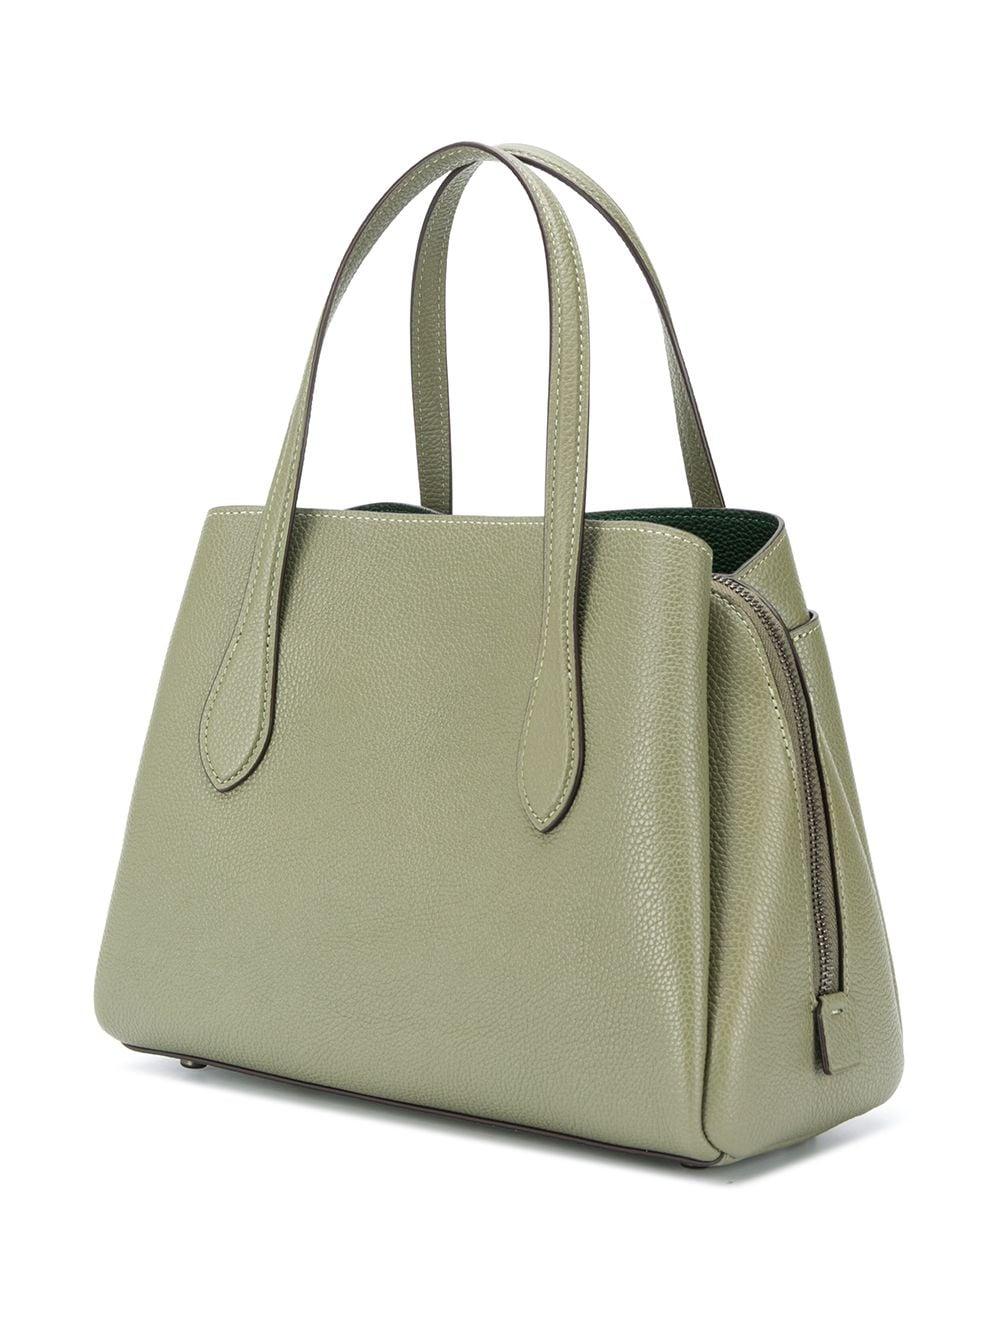 COACH Lora Carryall 30 Tote Bag in Green | Lyst